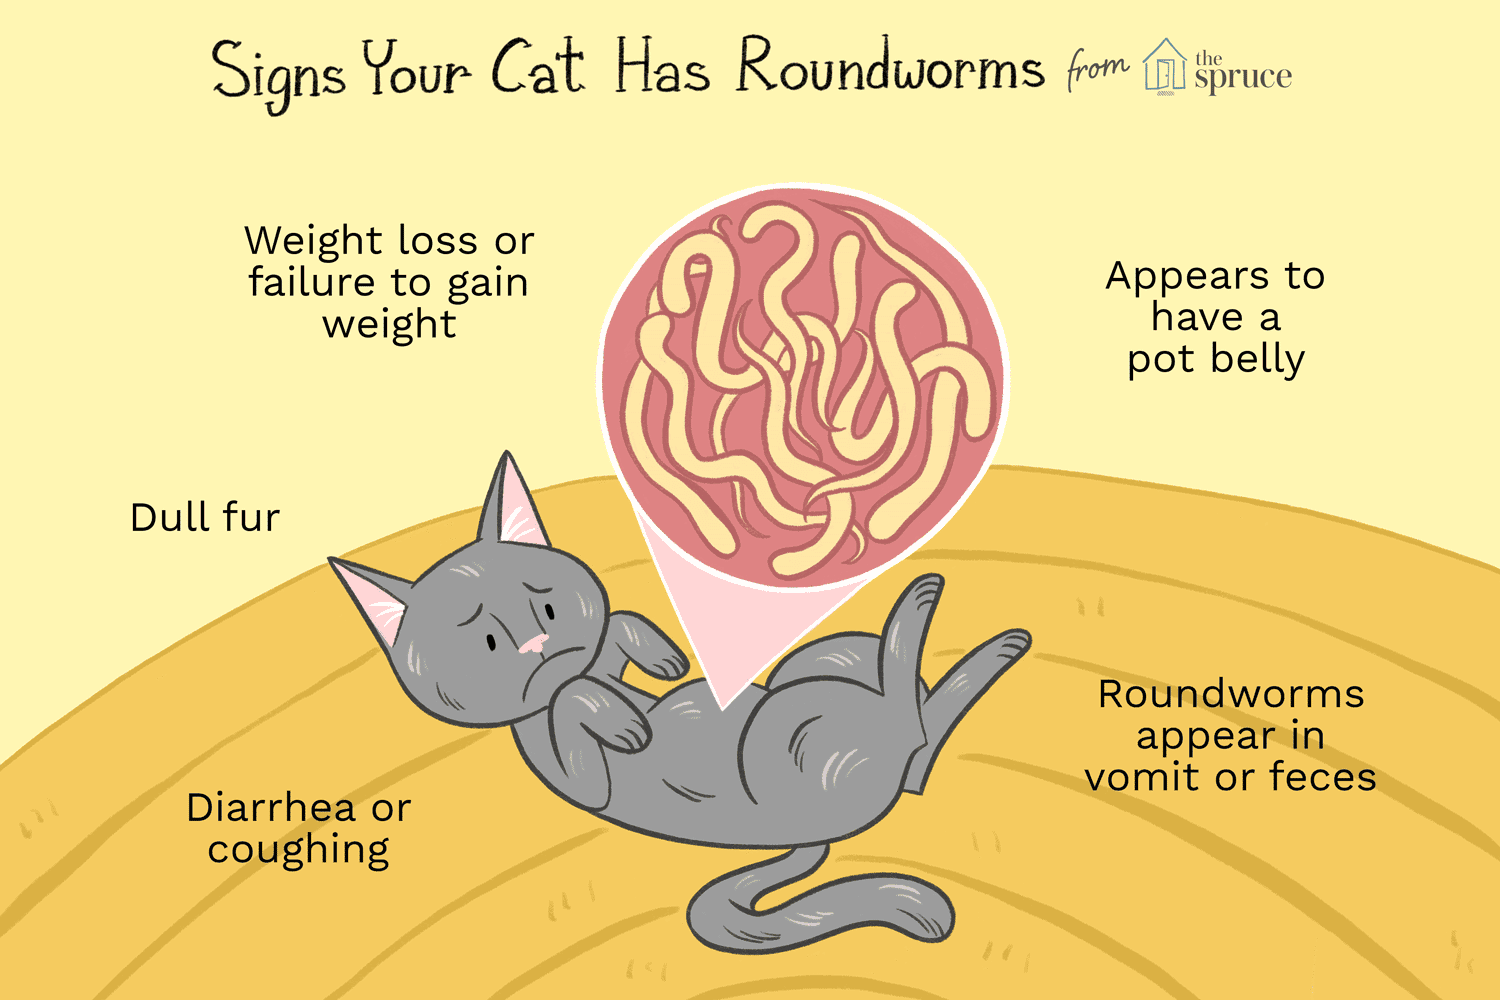 How Do You Know If Your Cat Has Roundworms